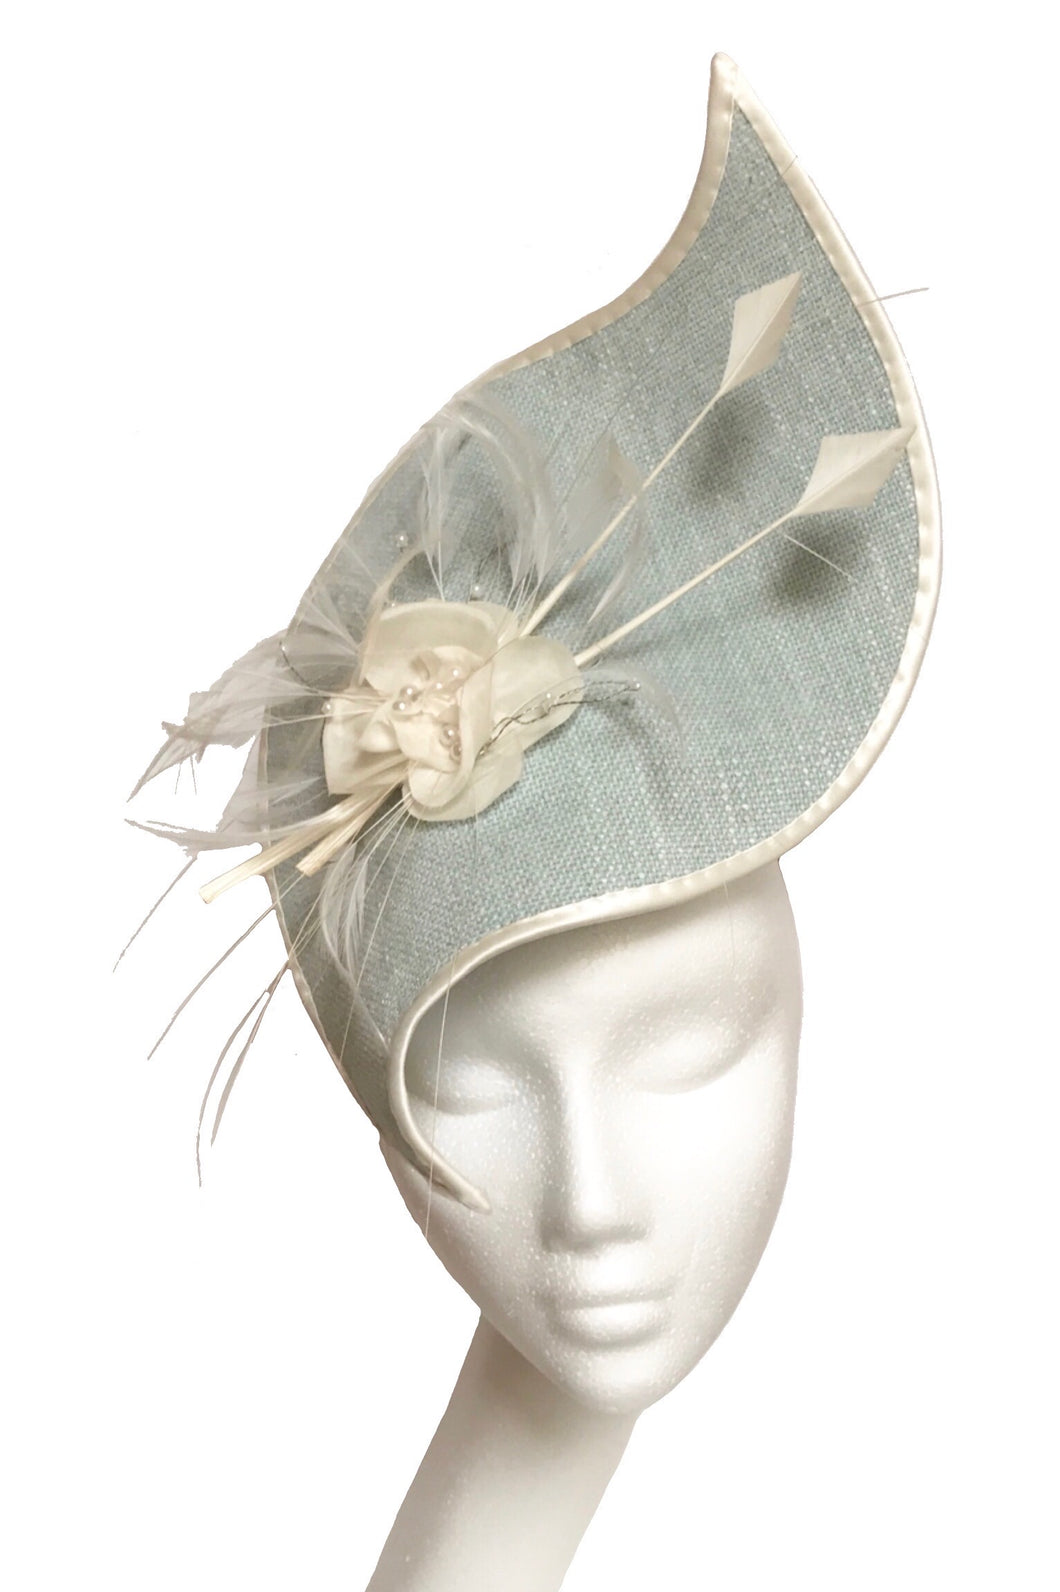 Duck egg blue headpiece to hire